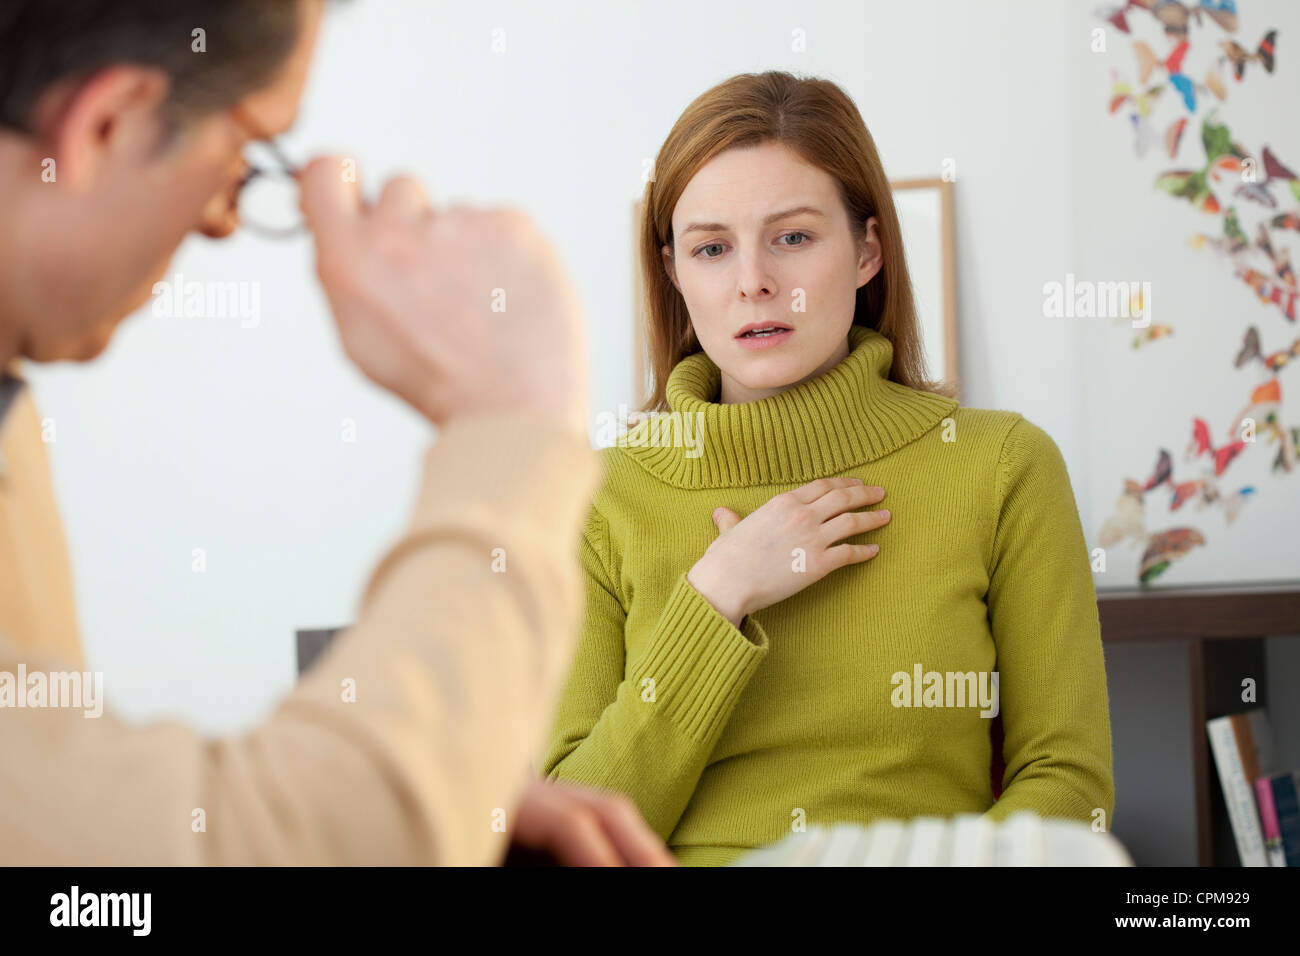 PSYCHOTHERAPY Stock Photo